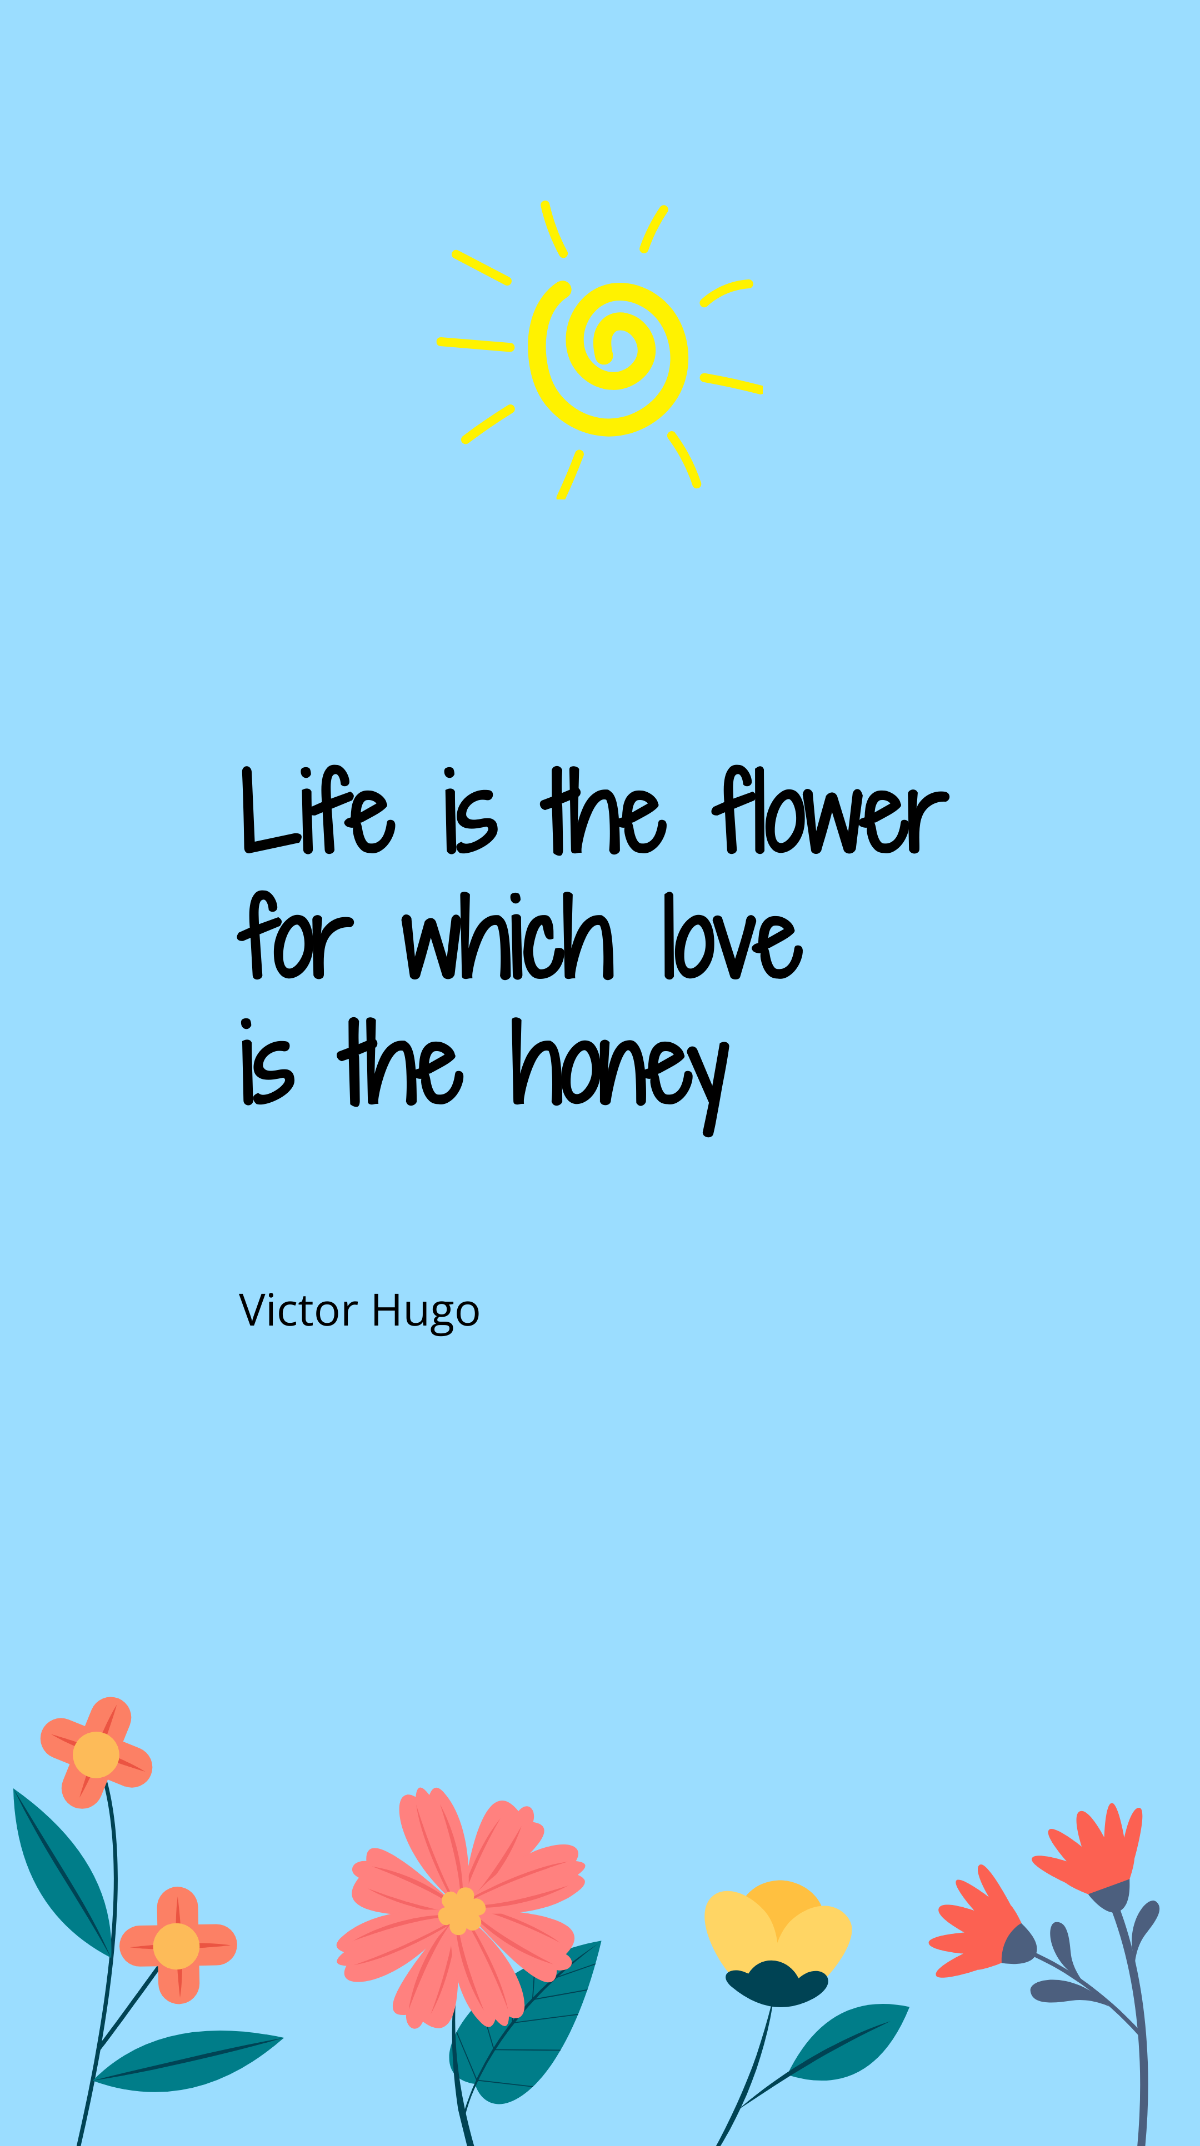 Victor Hugo - Life is the flower for which love is the honey 